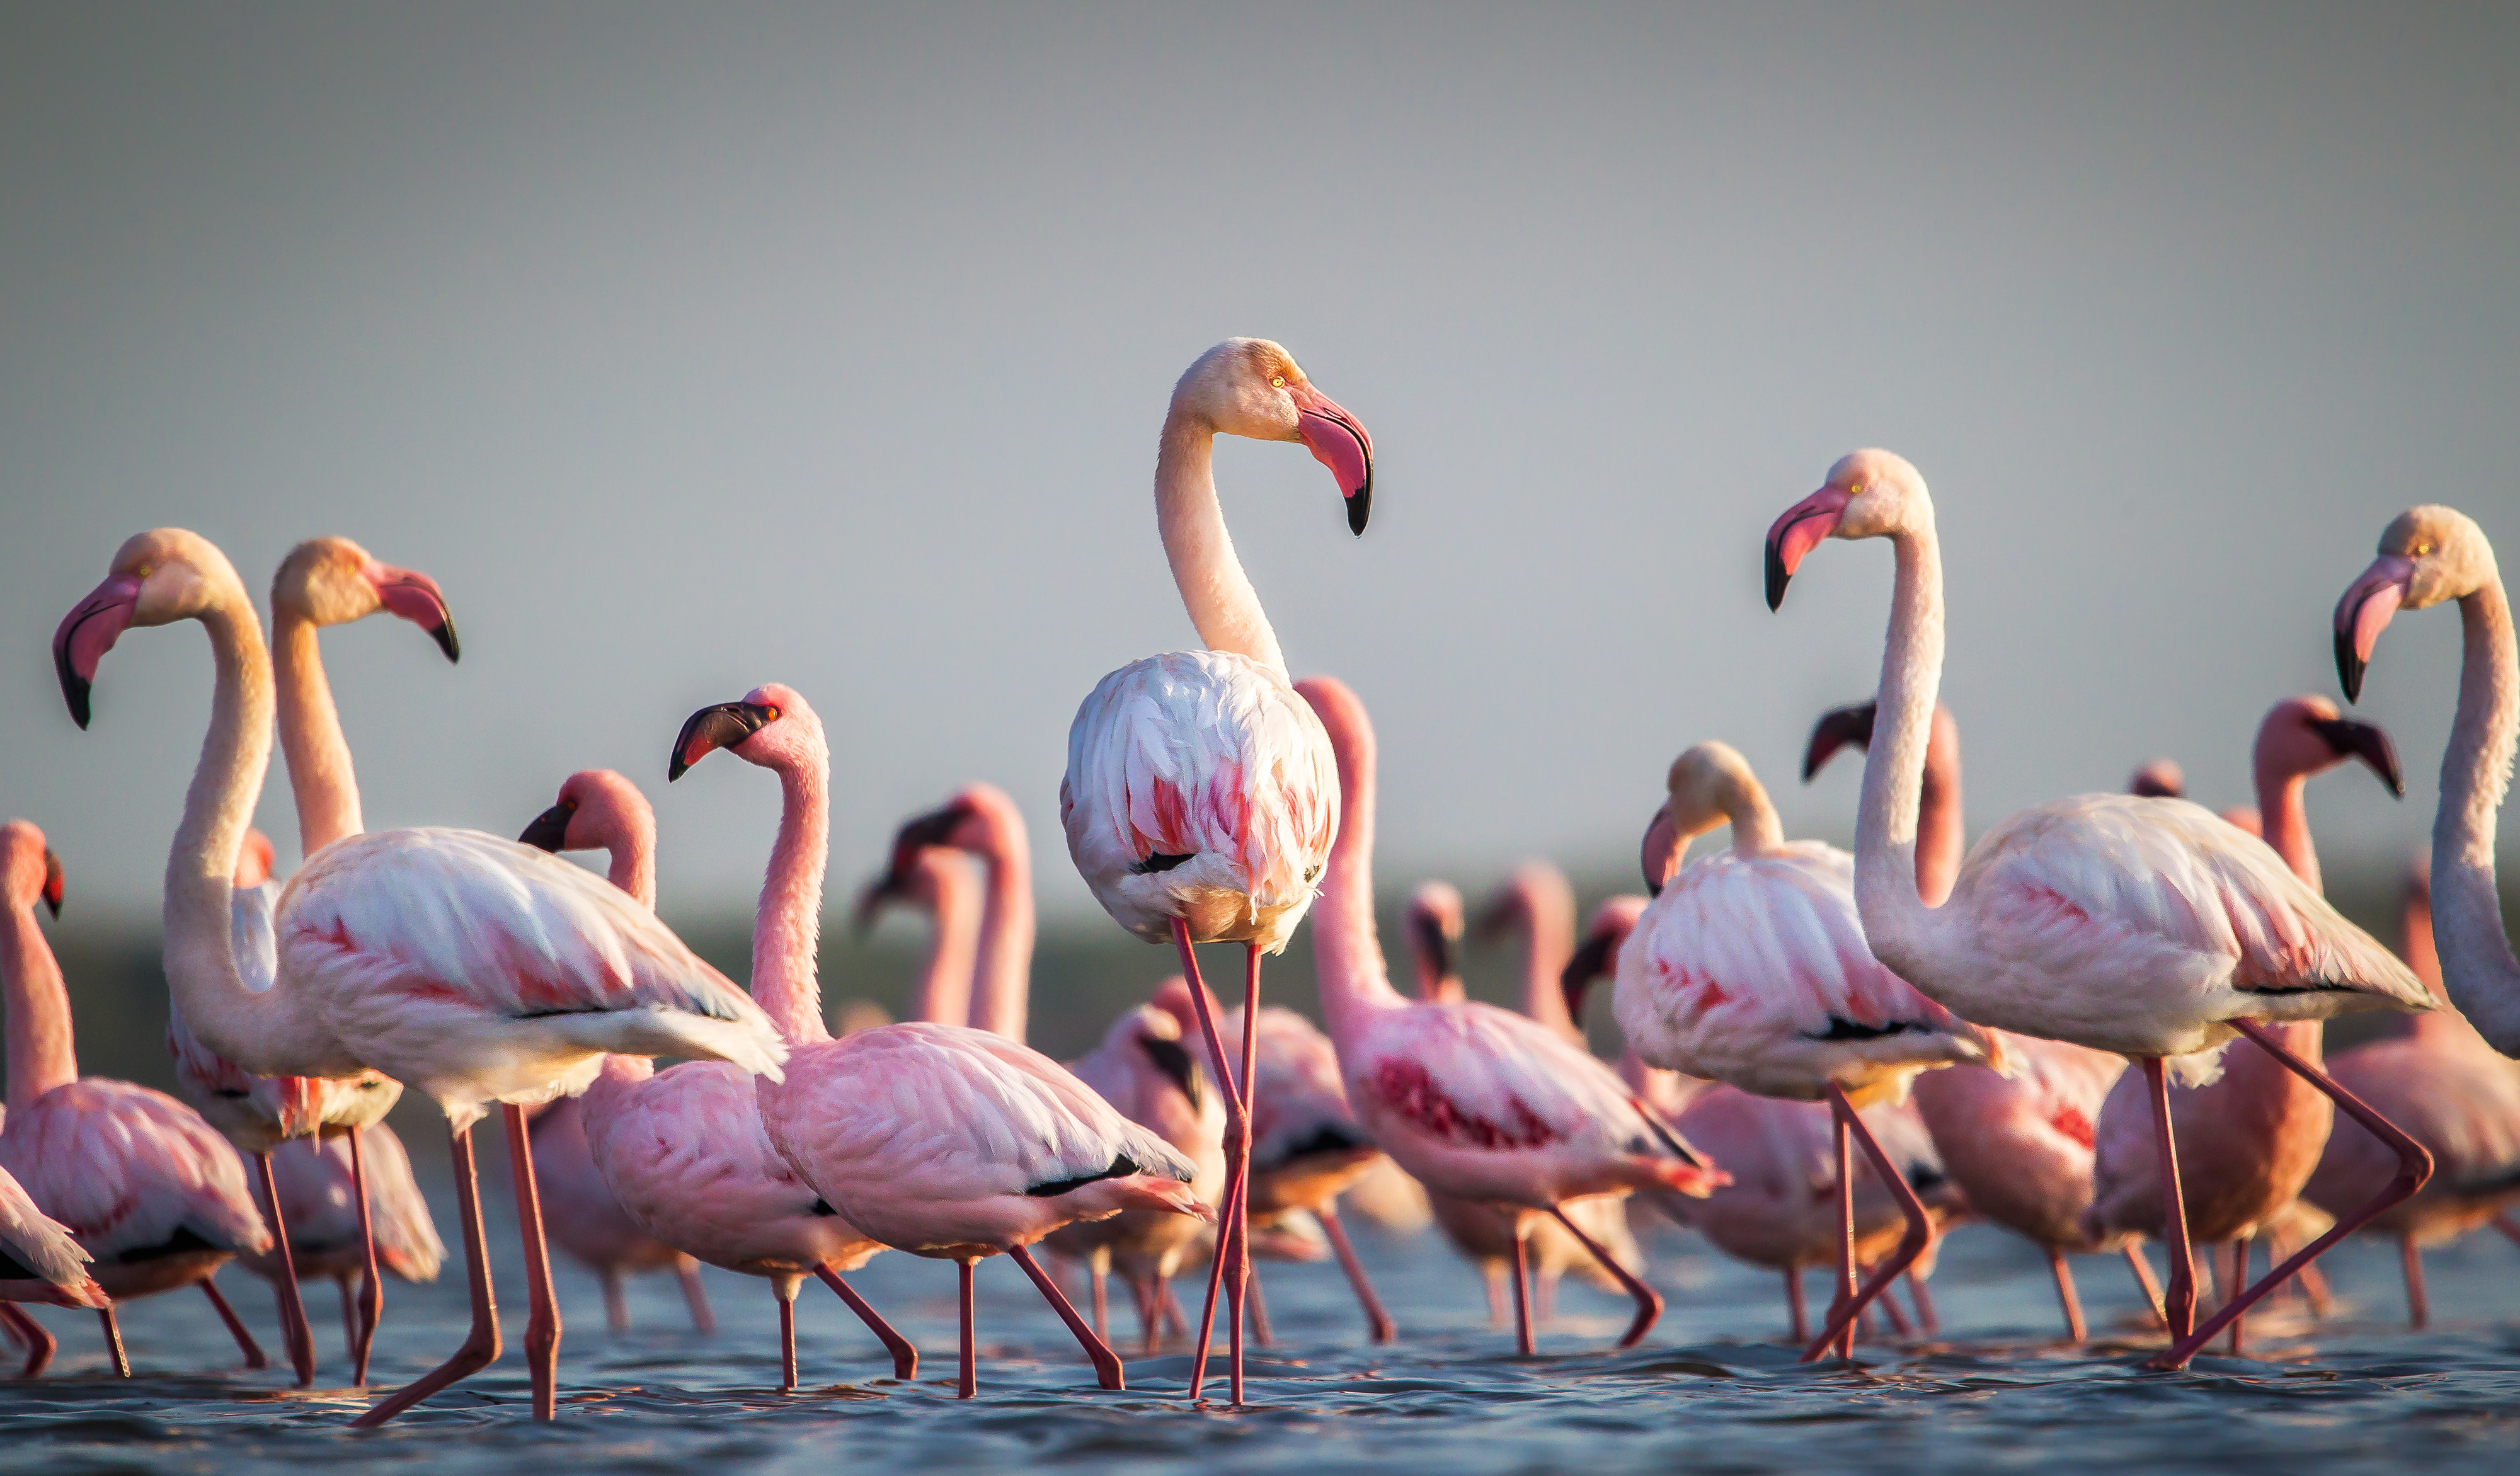 7 animals that have survived natural disasters - flamingos